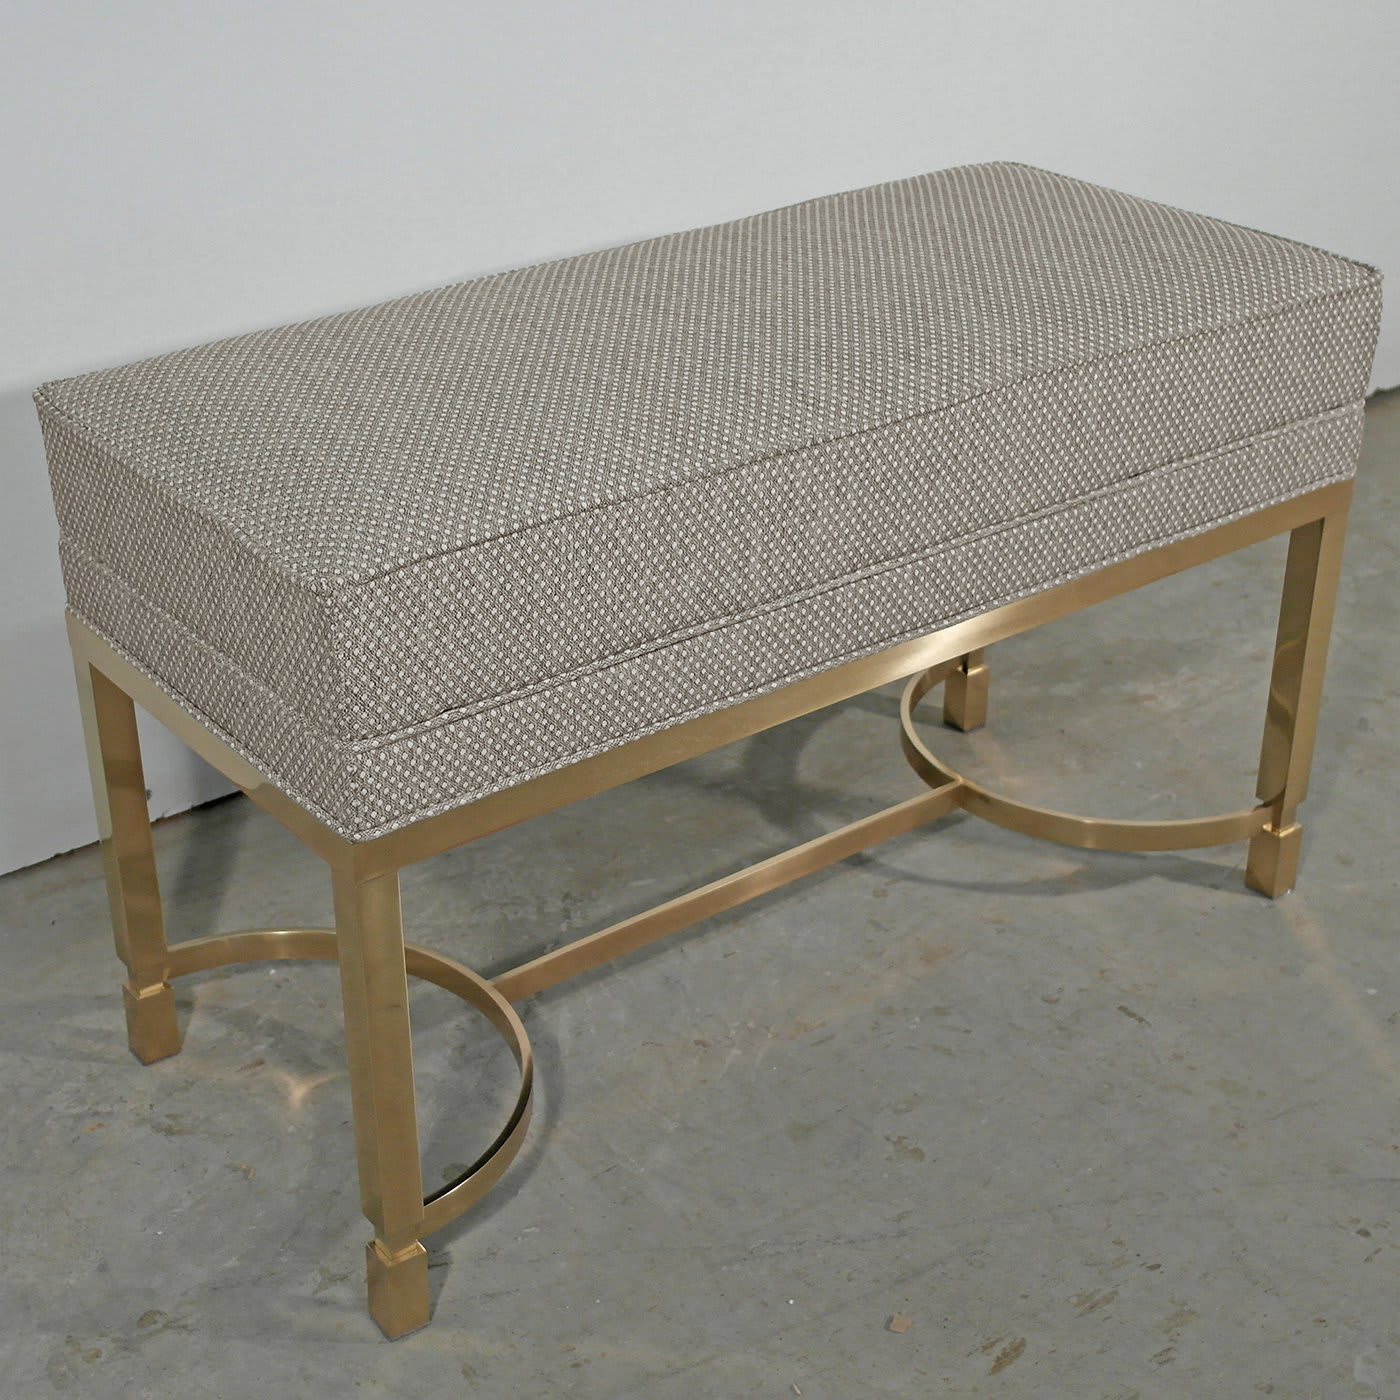 Two-Tone Upholstered Bench - S&L Interni